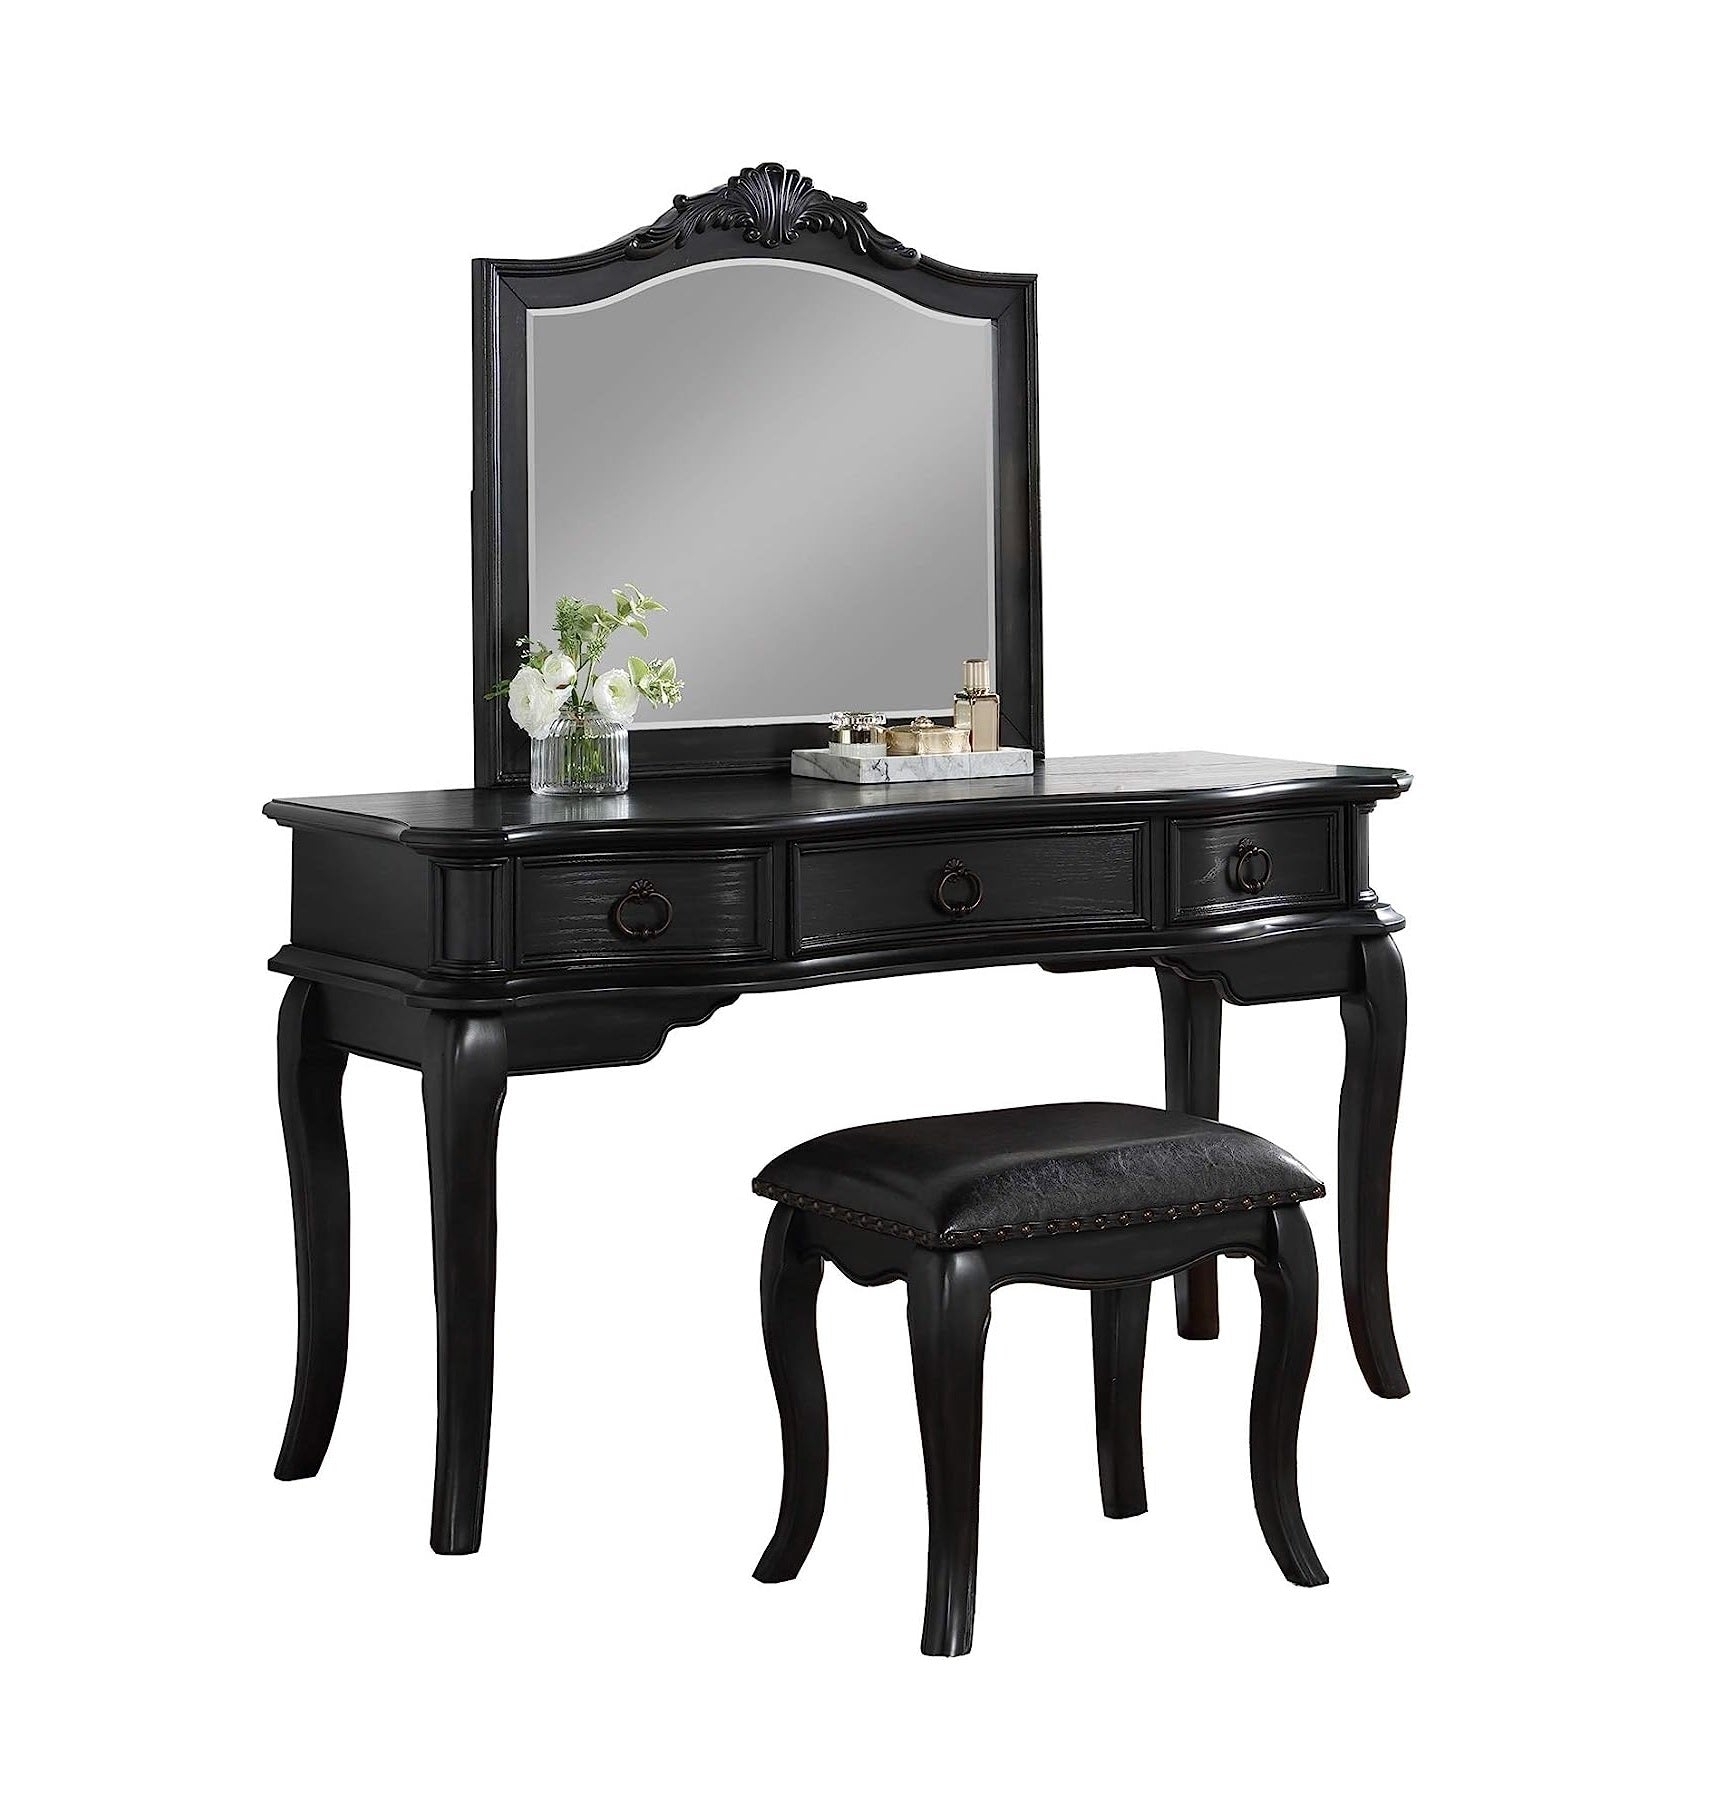 ZNTS Contemporary Black Color Vanity Set w Stool Retro Style Drawers cabriole-tapered legs Mirror w B011113315